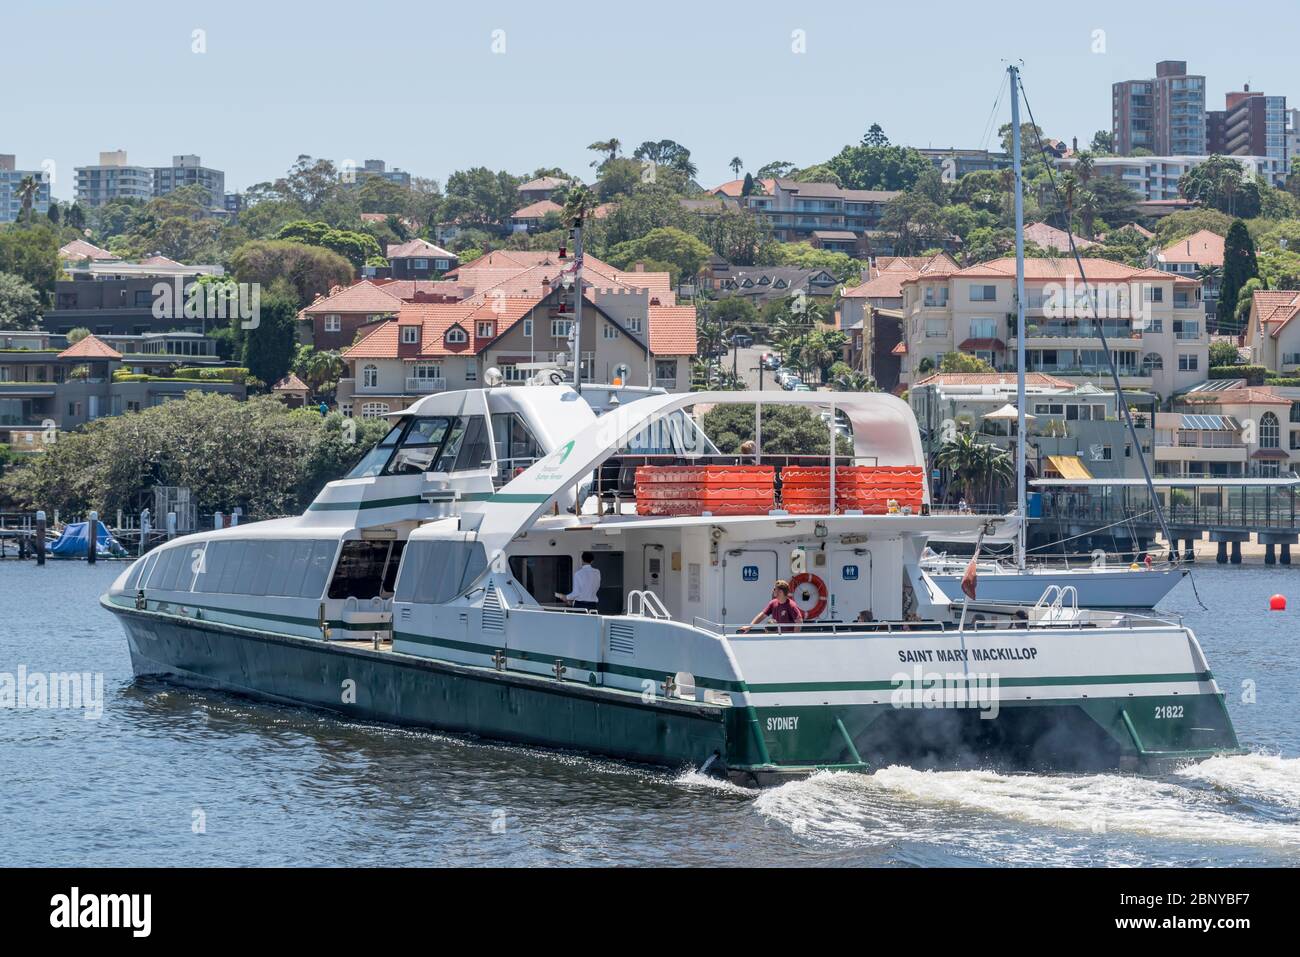 The Super Cat Class Sydney Ferry catamaran named Saint Mary Mackillop departs from North Sydney Wharf in Sydney Harbour, Australia Stock Photo